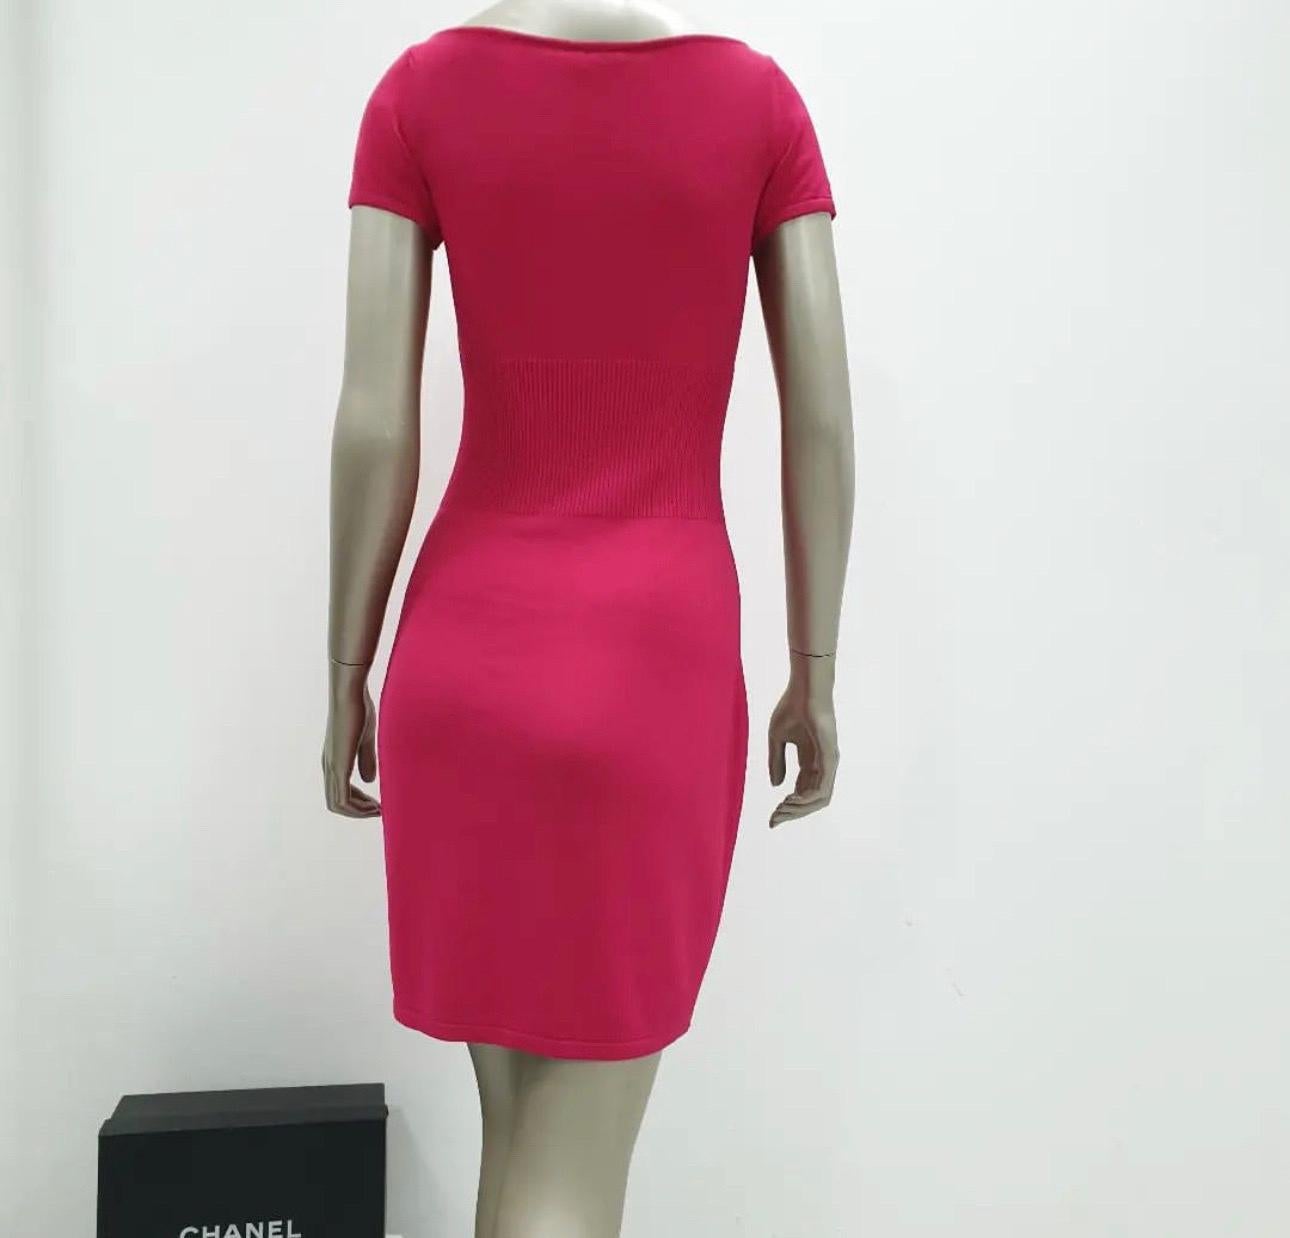 2010 Lion Logo CC.
Pink Knee-Length Pullover Knit Shift Sweater MIDI mini Dress 
Size 36

Very good condition.